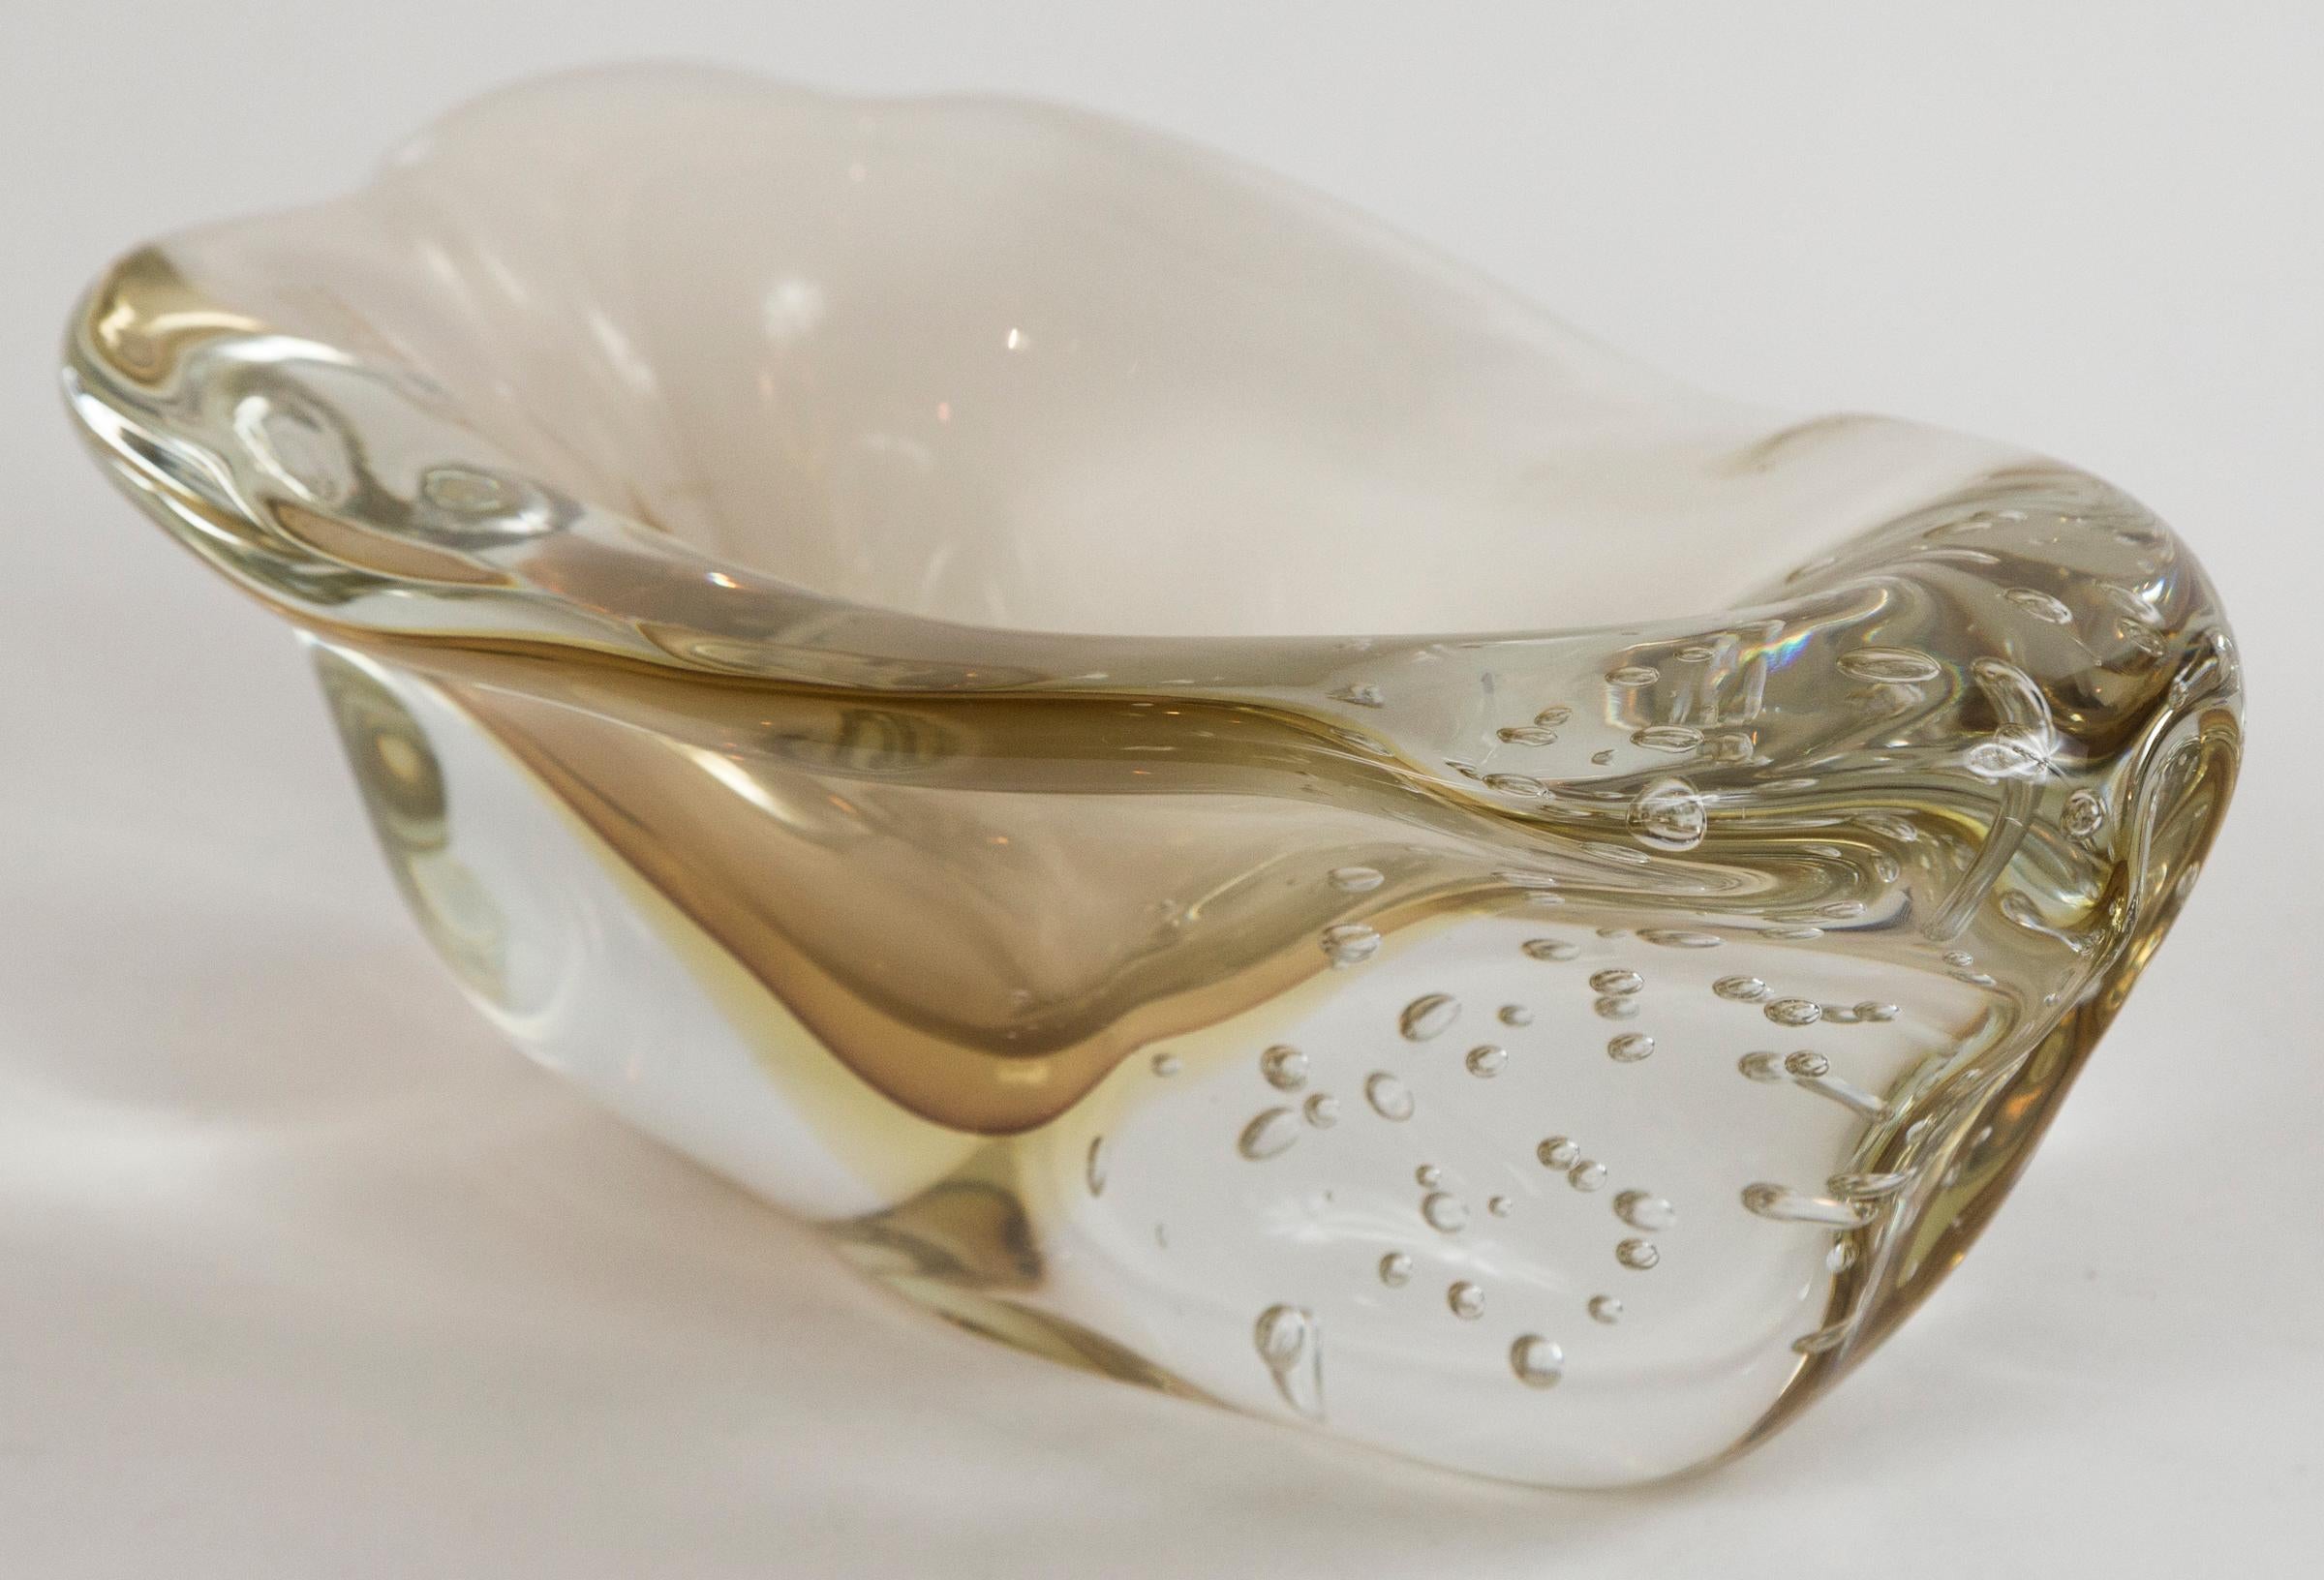 Wonderful one of a kind artisan blown irregular shaped bowl with large controlled bubbles to one side and center floating orb shape in varying layers of citron executed in the sommerso technique, signed by the artist.
Amazing accompaniment to the